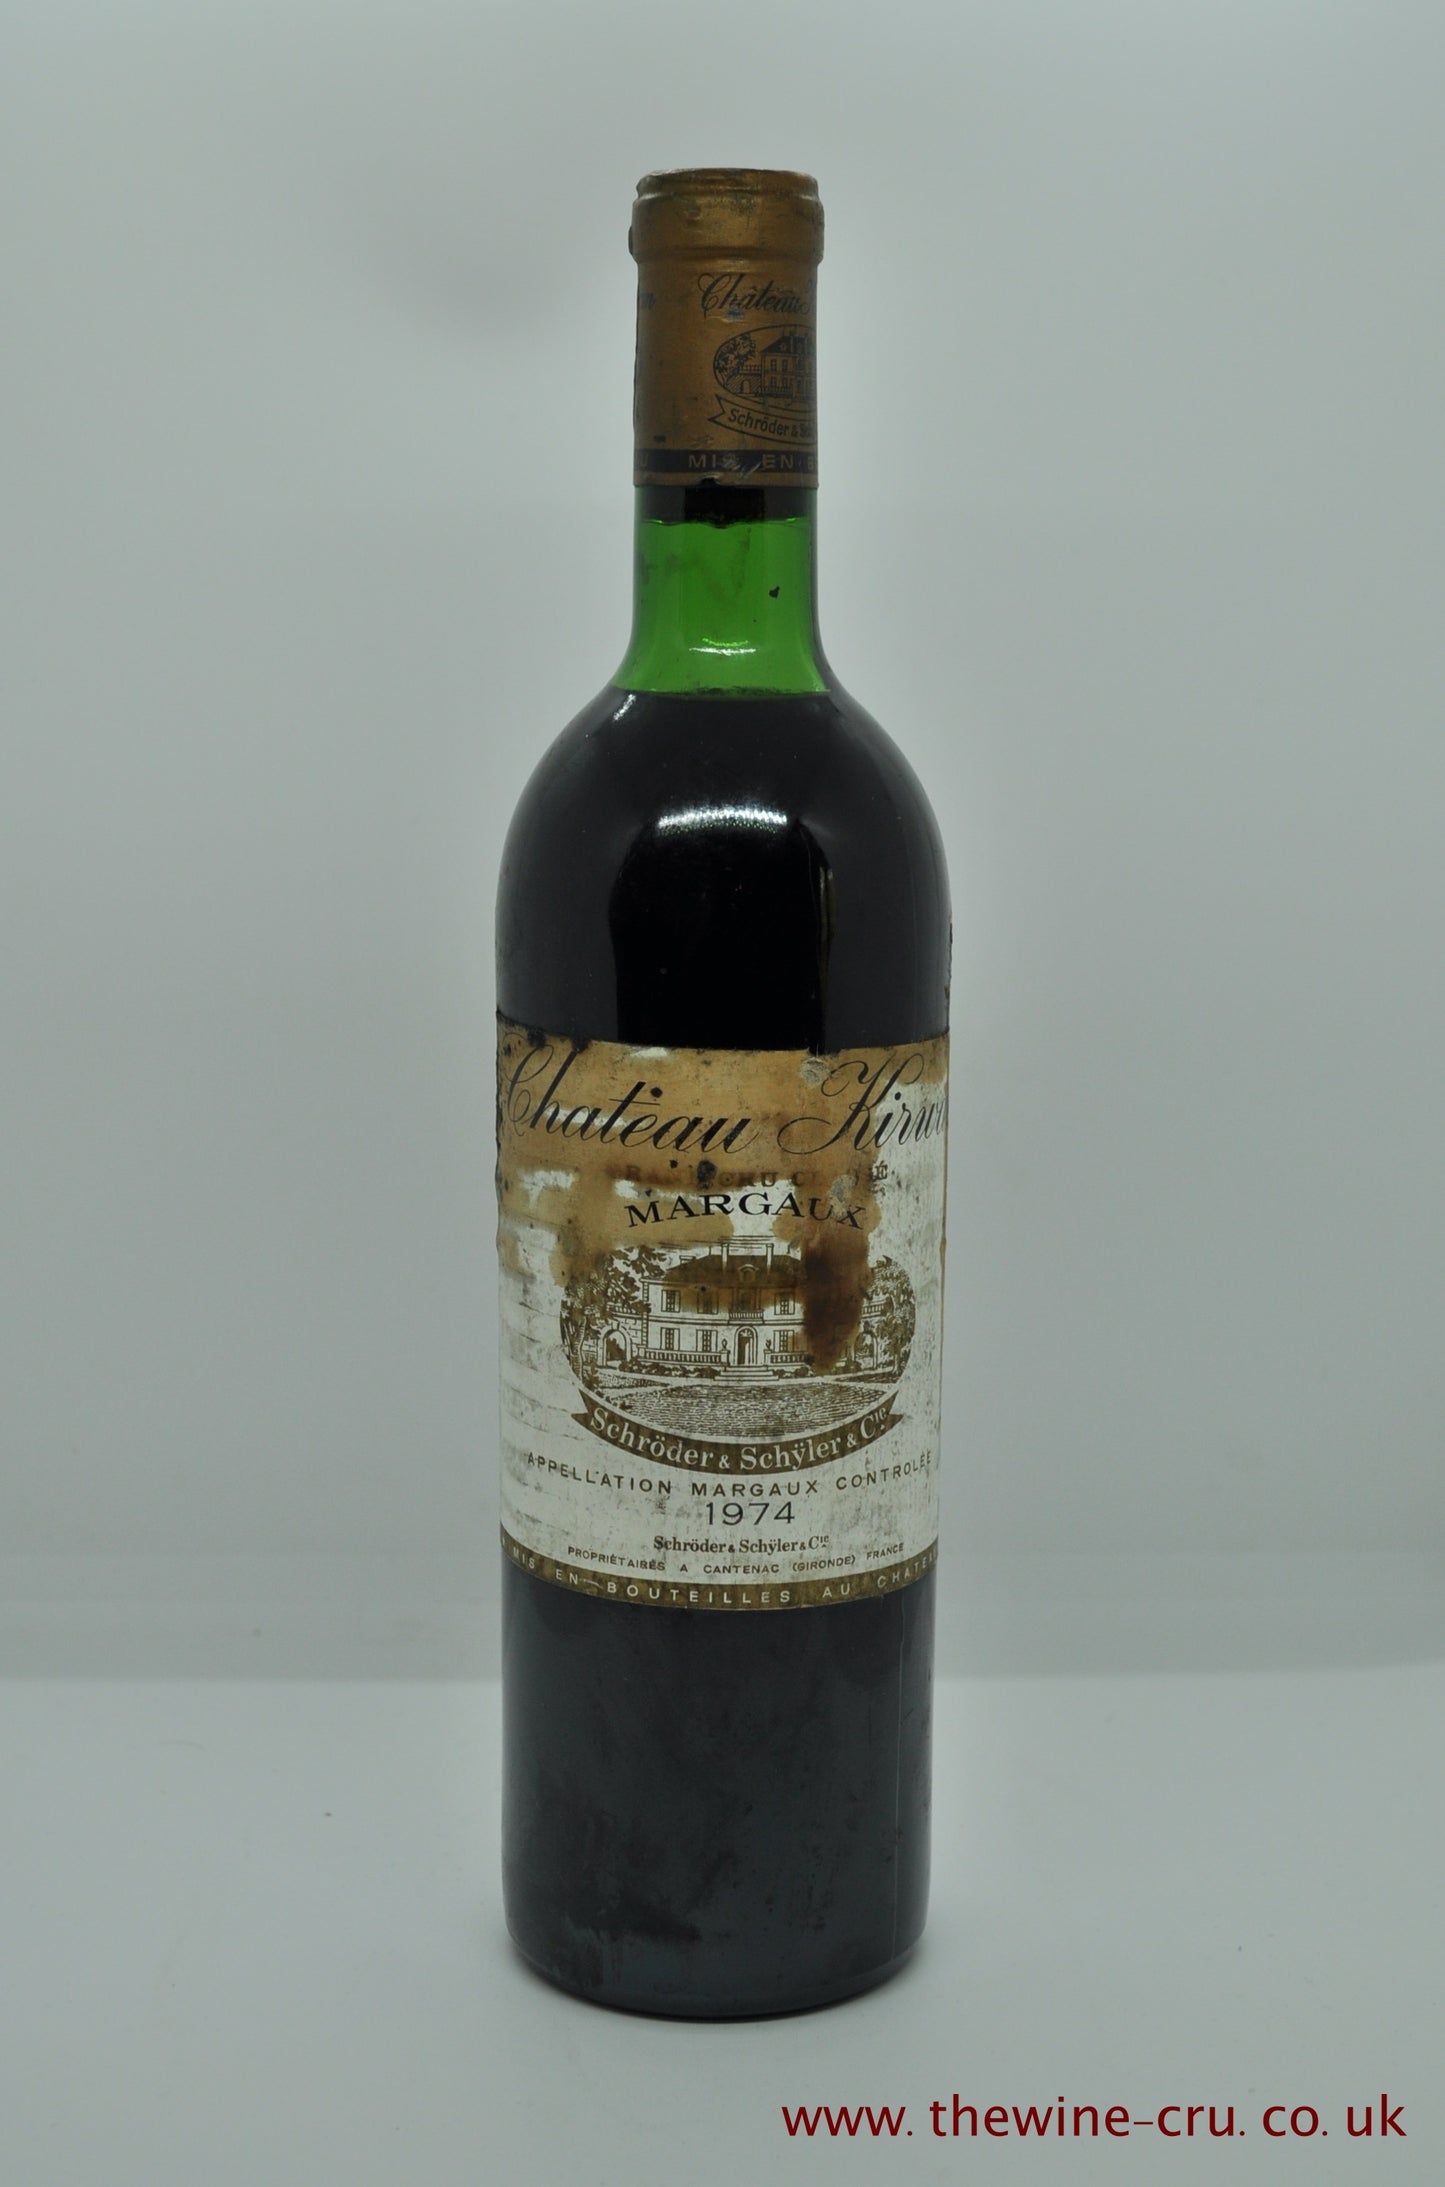 1974 vintage red wine. Chateau Kirwan 1974 France Bordeaux. Immediate delivery. Free local delivery. Gift wrapping available.